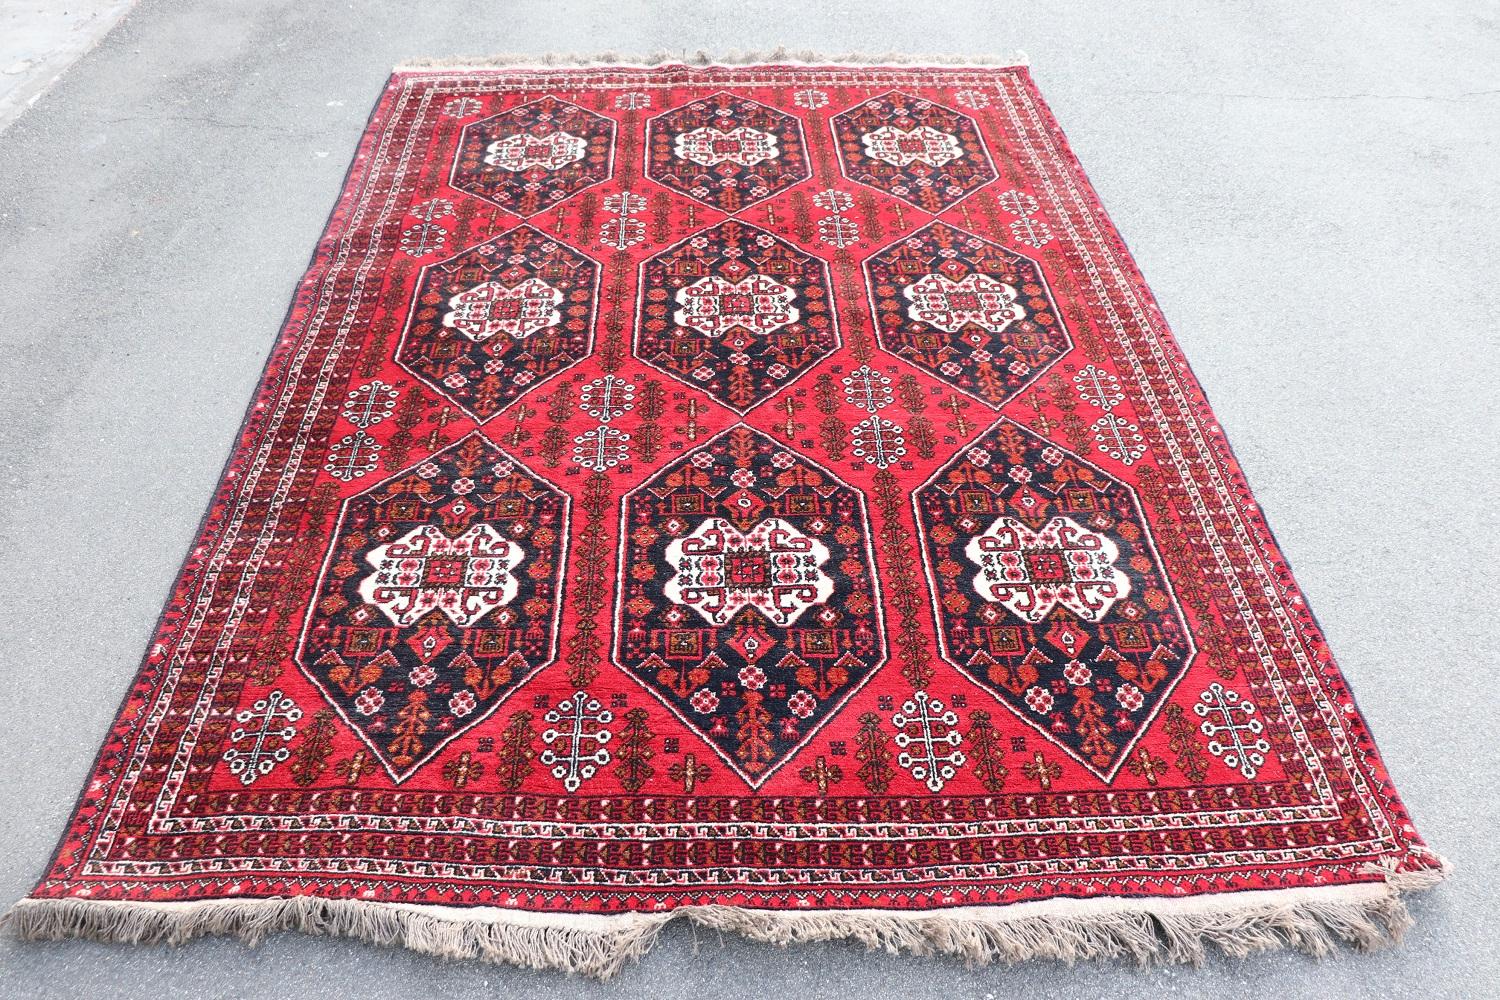 Beautiful 20th century ( 1980s circa)  persian shiraz rug handmade in wool. This fantastic rug it is in the main color red with a motif of central medallions with blue background, the colors are vibrant. Used conditions.
   